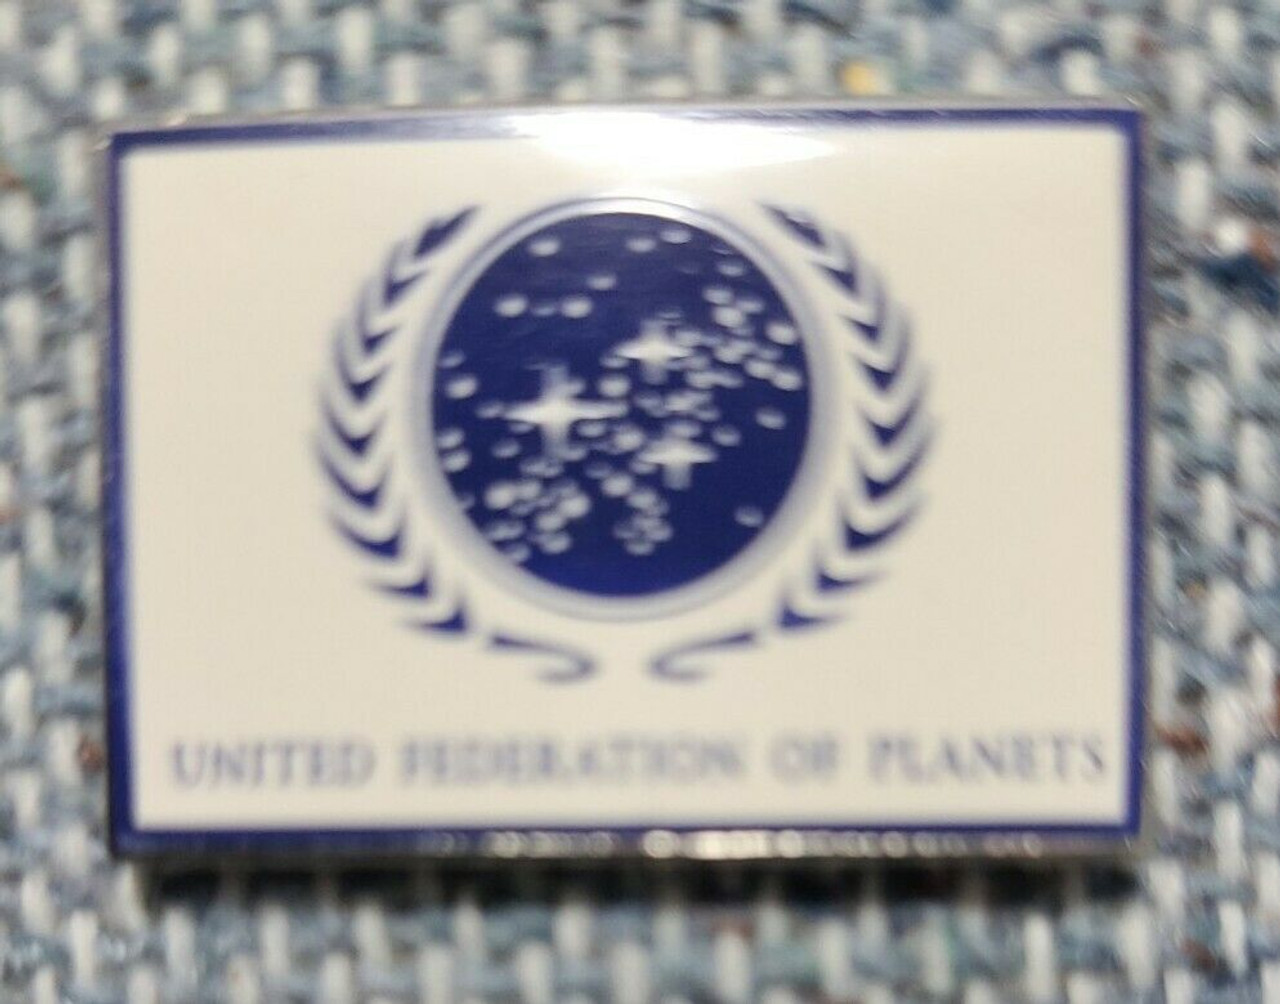 united federation of planets flag